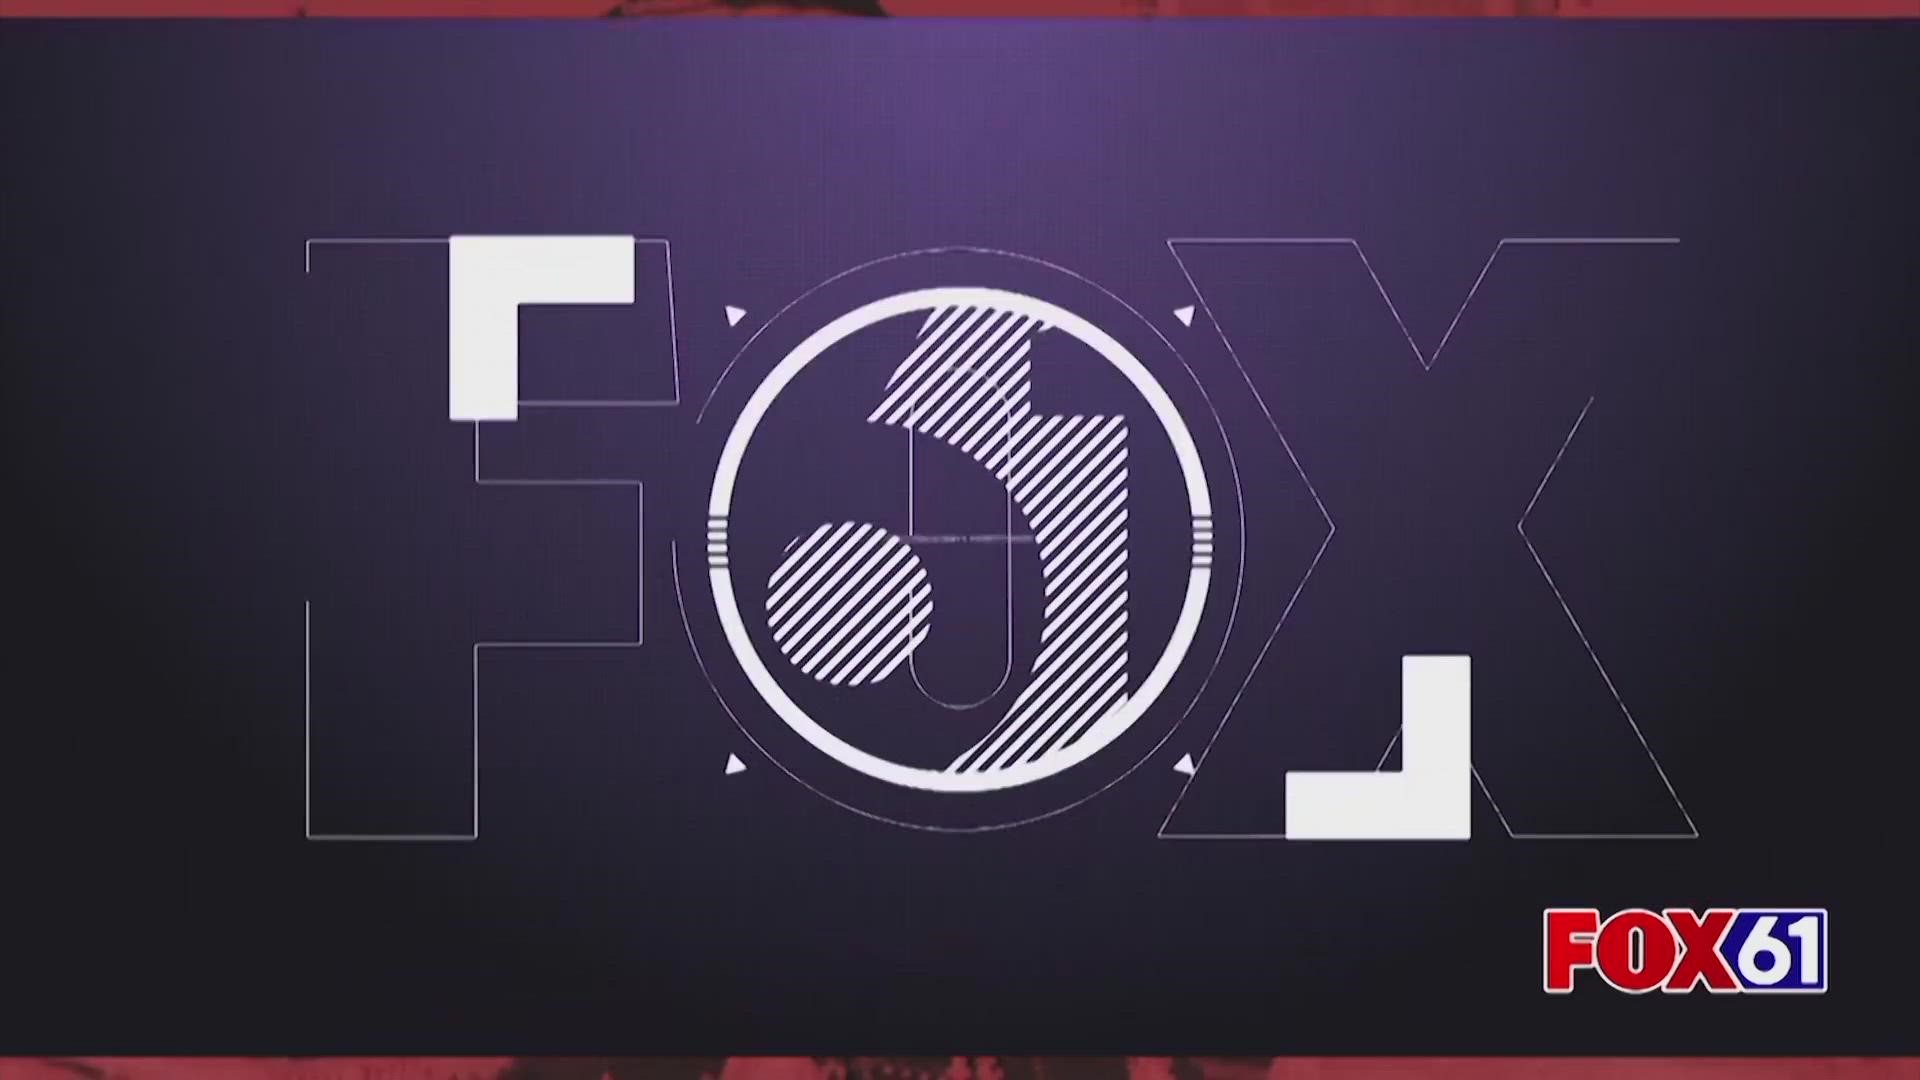 Now you can watch FOX61 News on Demand on Roku and Amazon Fire TV